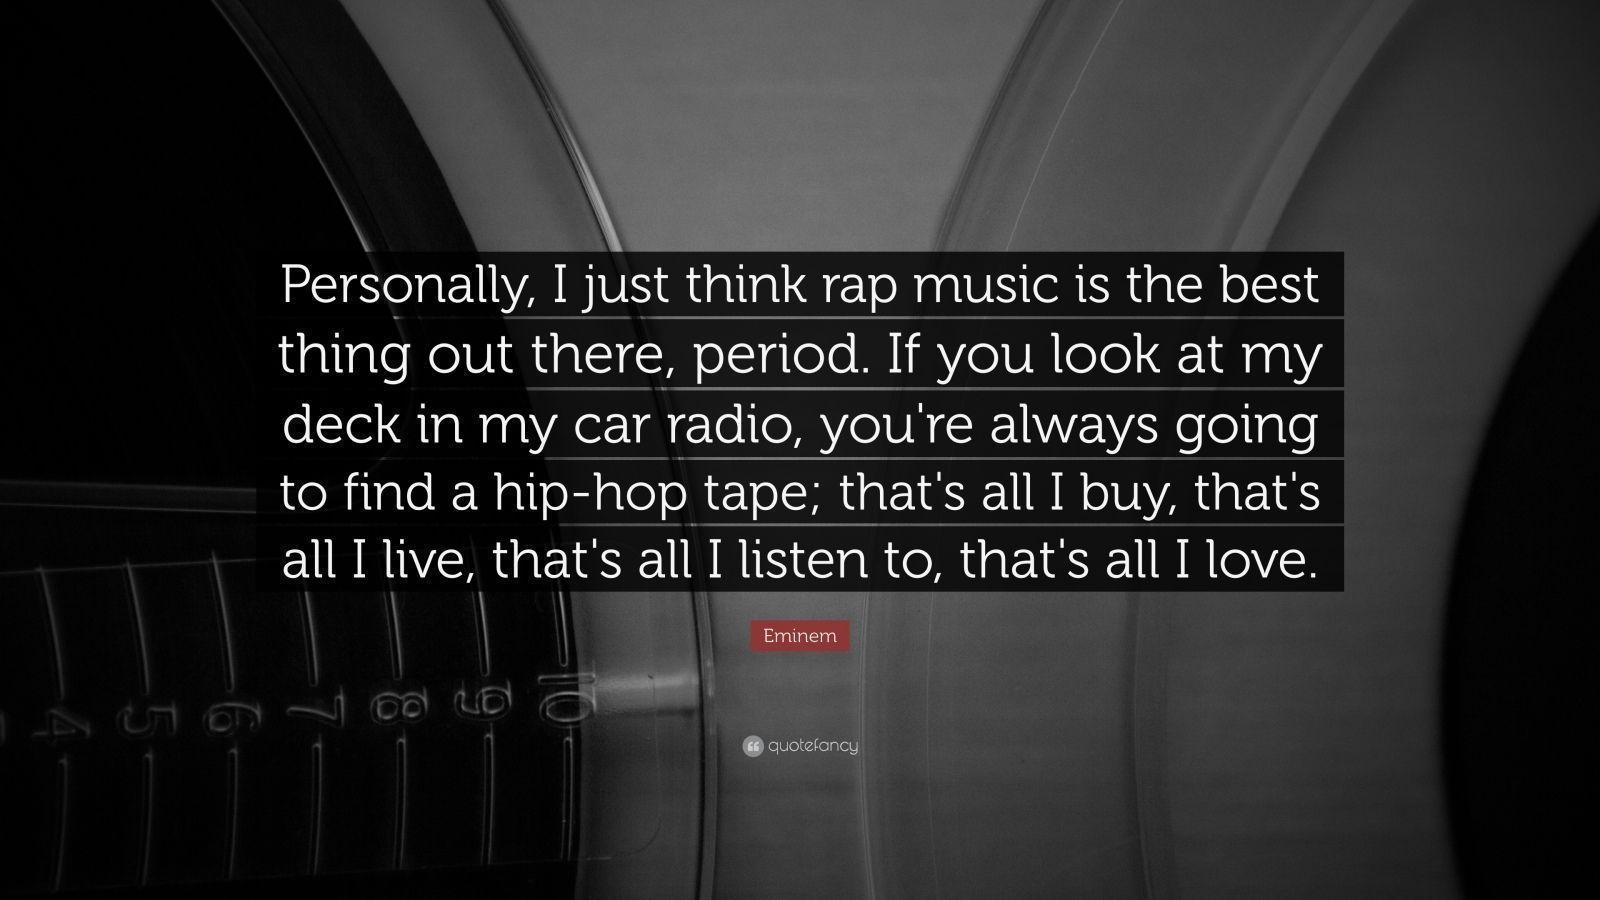 Eminem Quote: “Personally, I just think rap music is the best thing out there, period. If you look at my deck in my car radio, you're a.” (14 wallpaper)